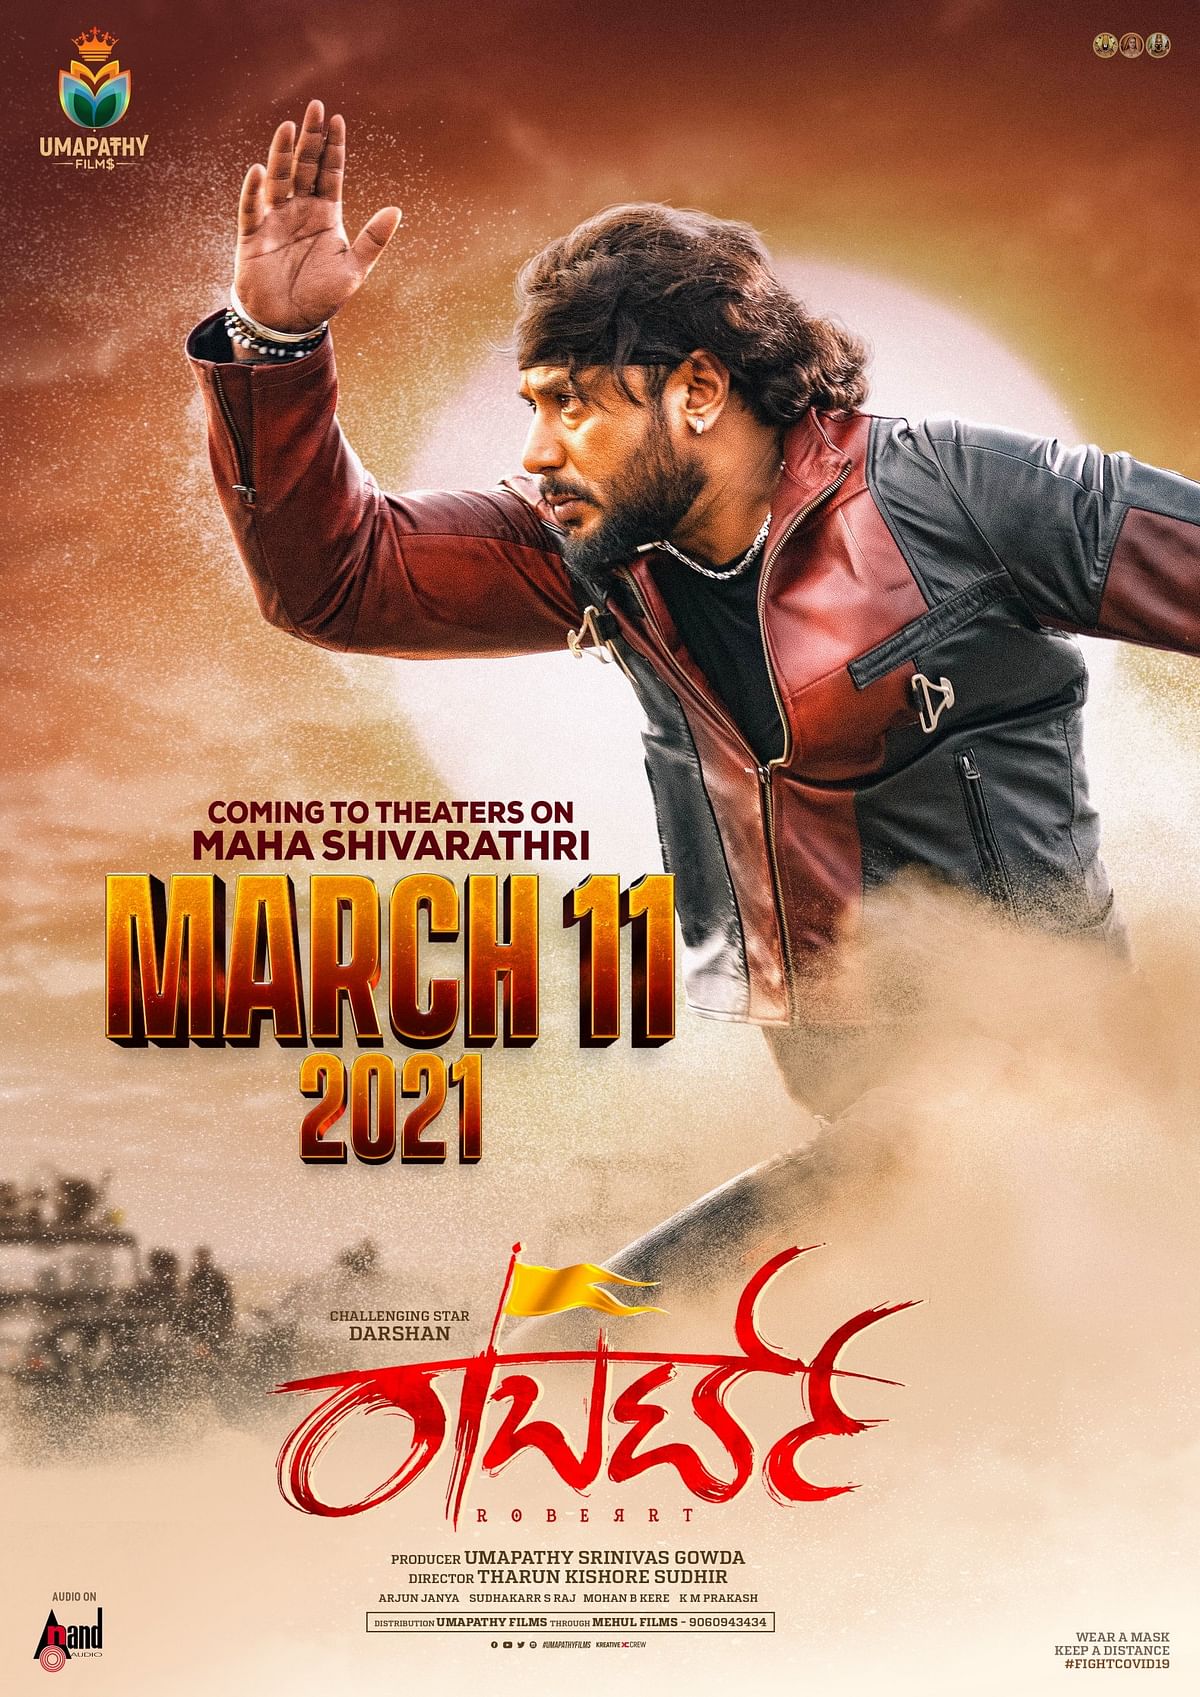 The first big Kannada release will be Darshan’s‘Roberrt’, directed by Tharun Sudhir, on March 11.